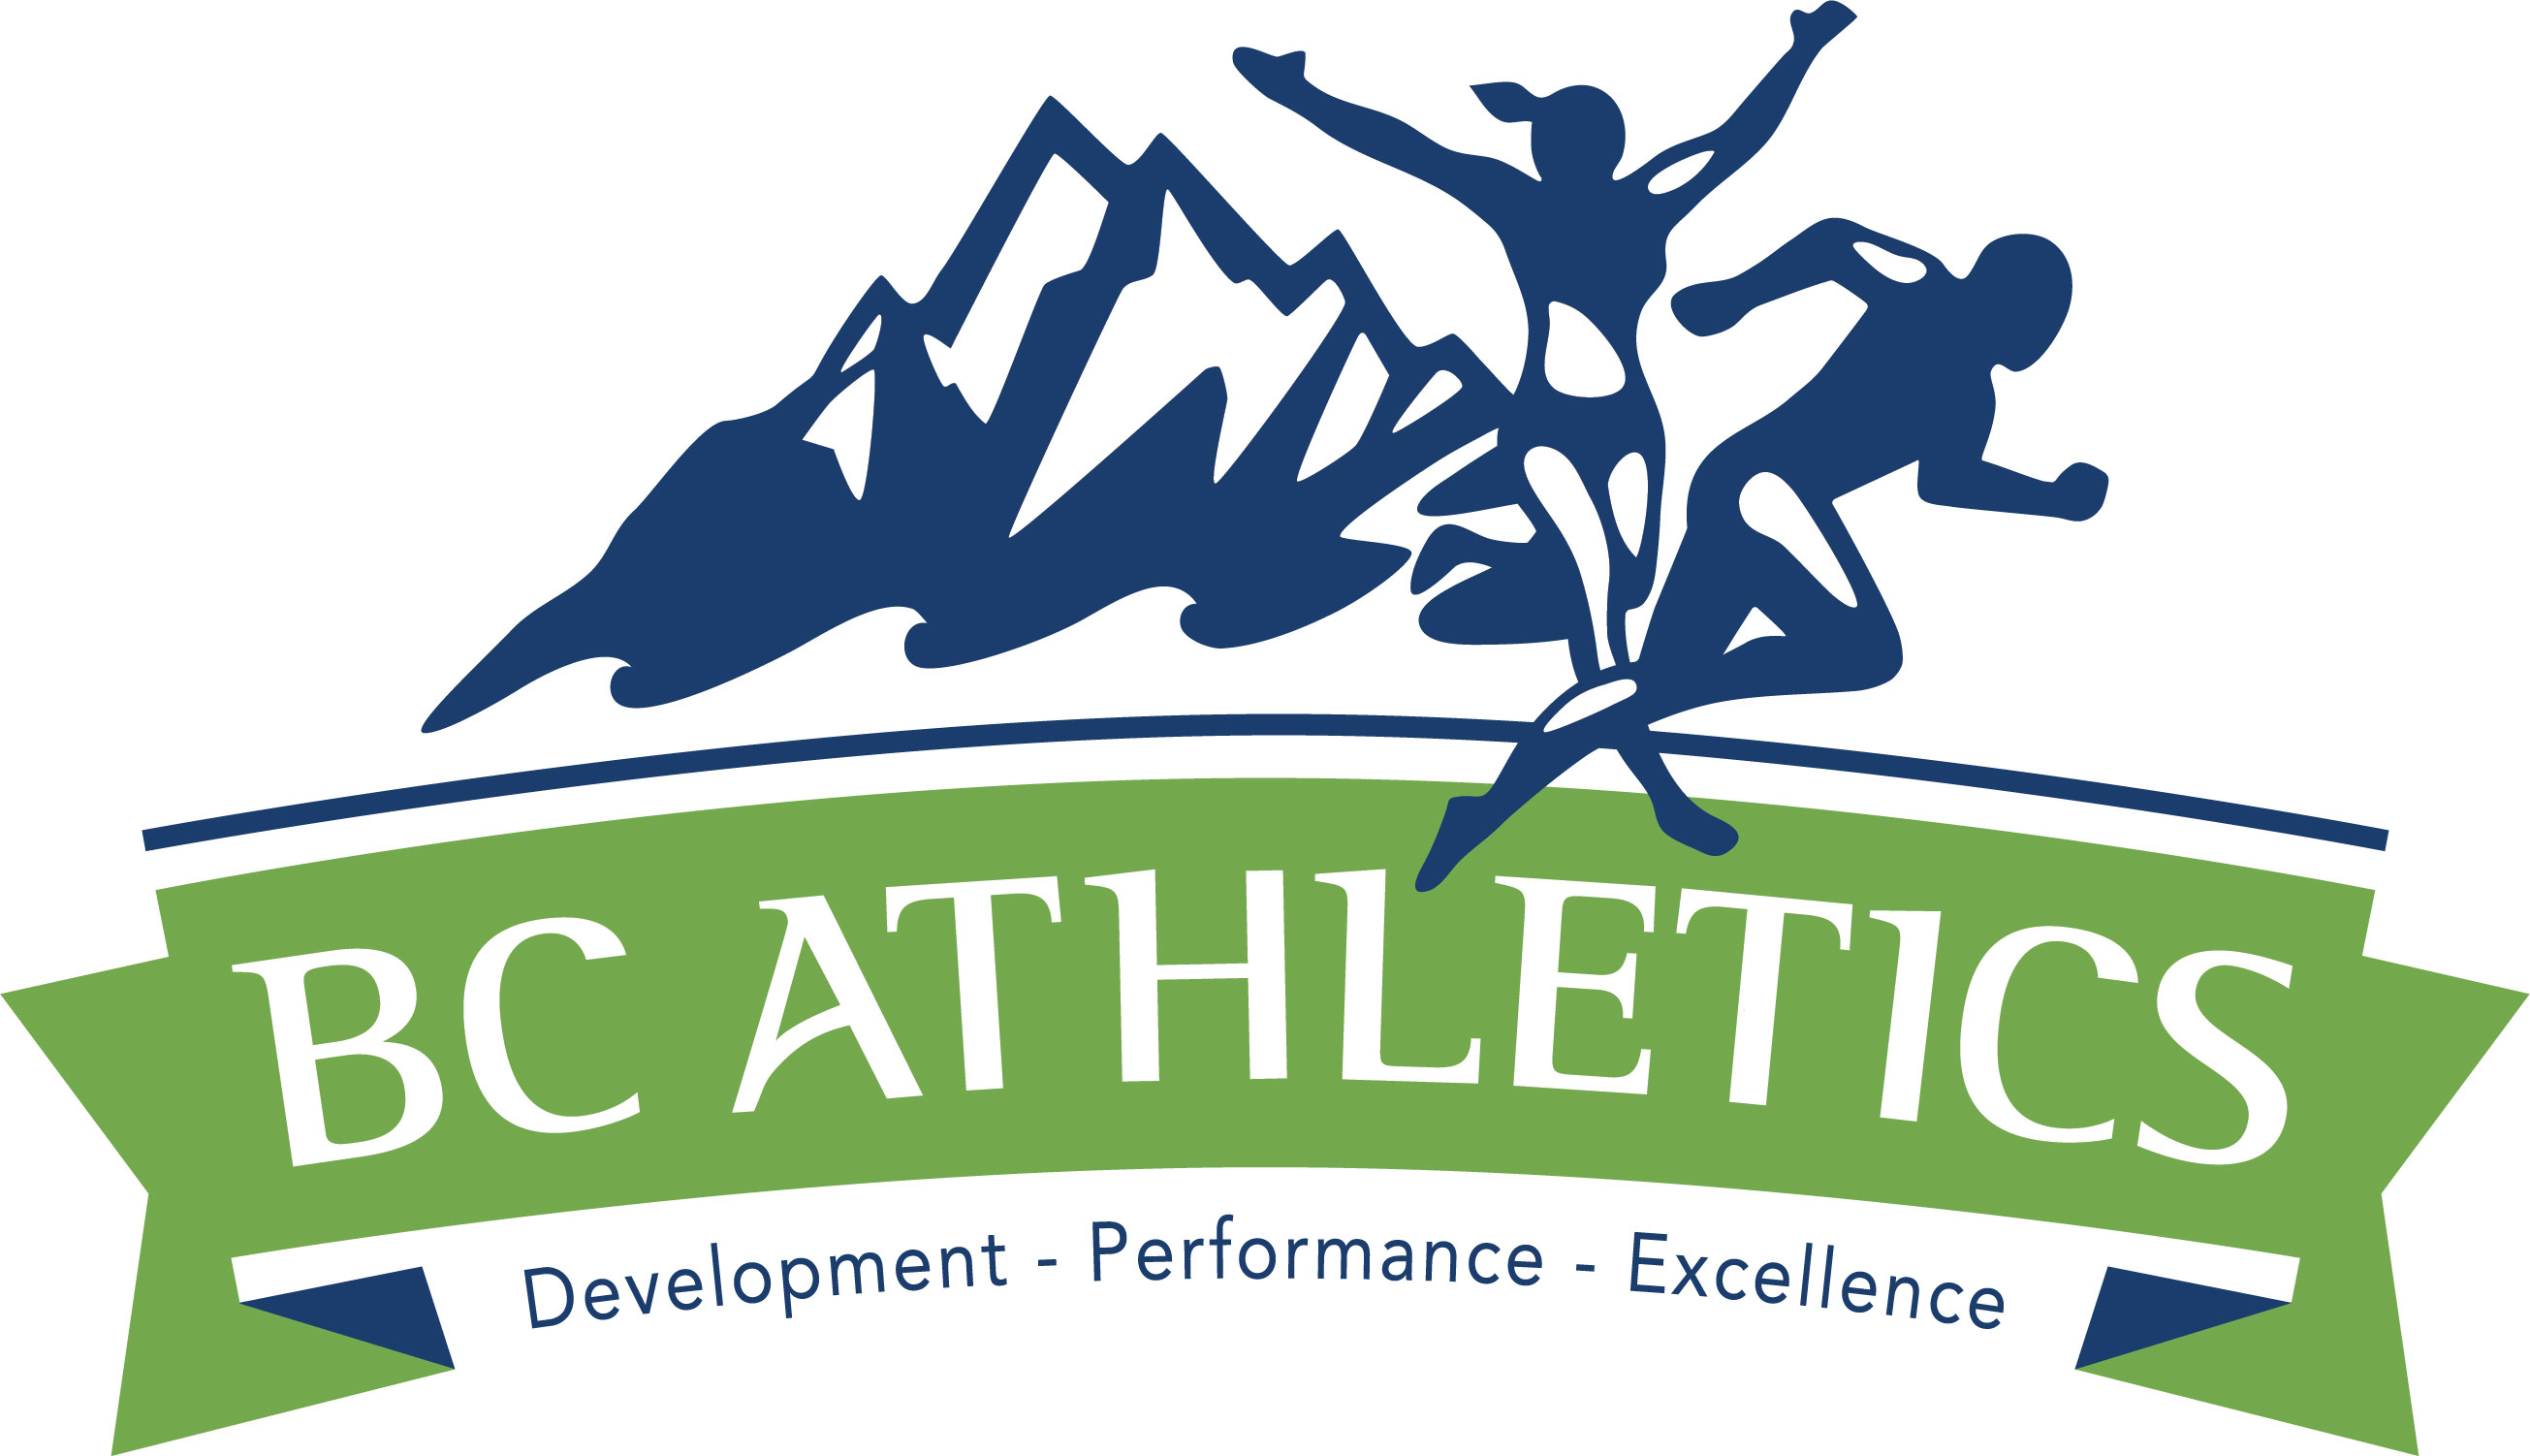 BC Athletics - Track and Field, Road Running, Cross Country, Race Walking,  Marathons, Ultras in British Columbia, Canada